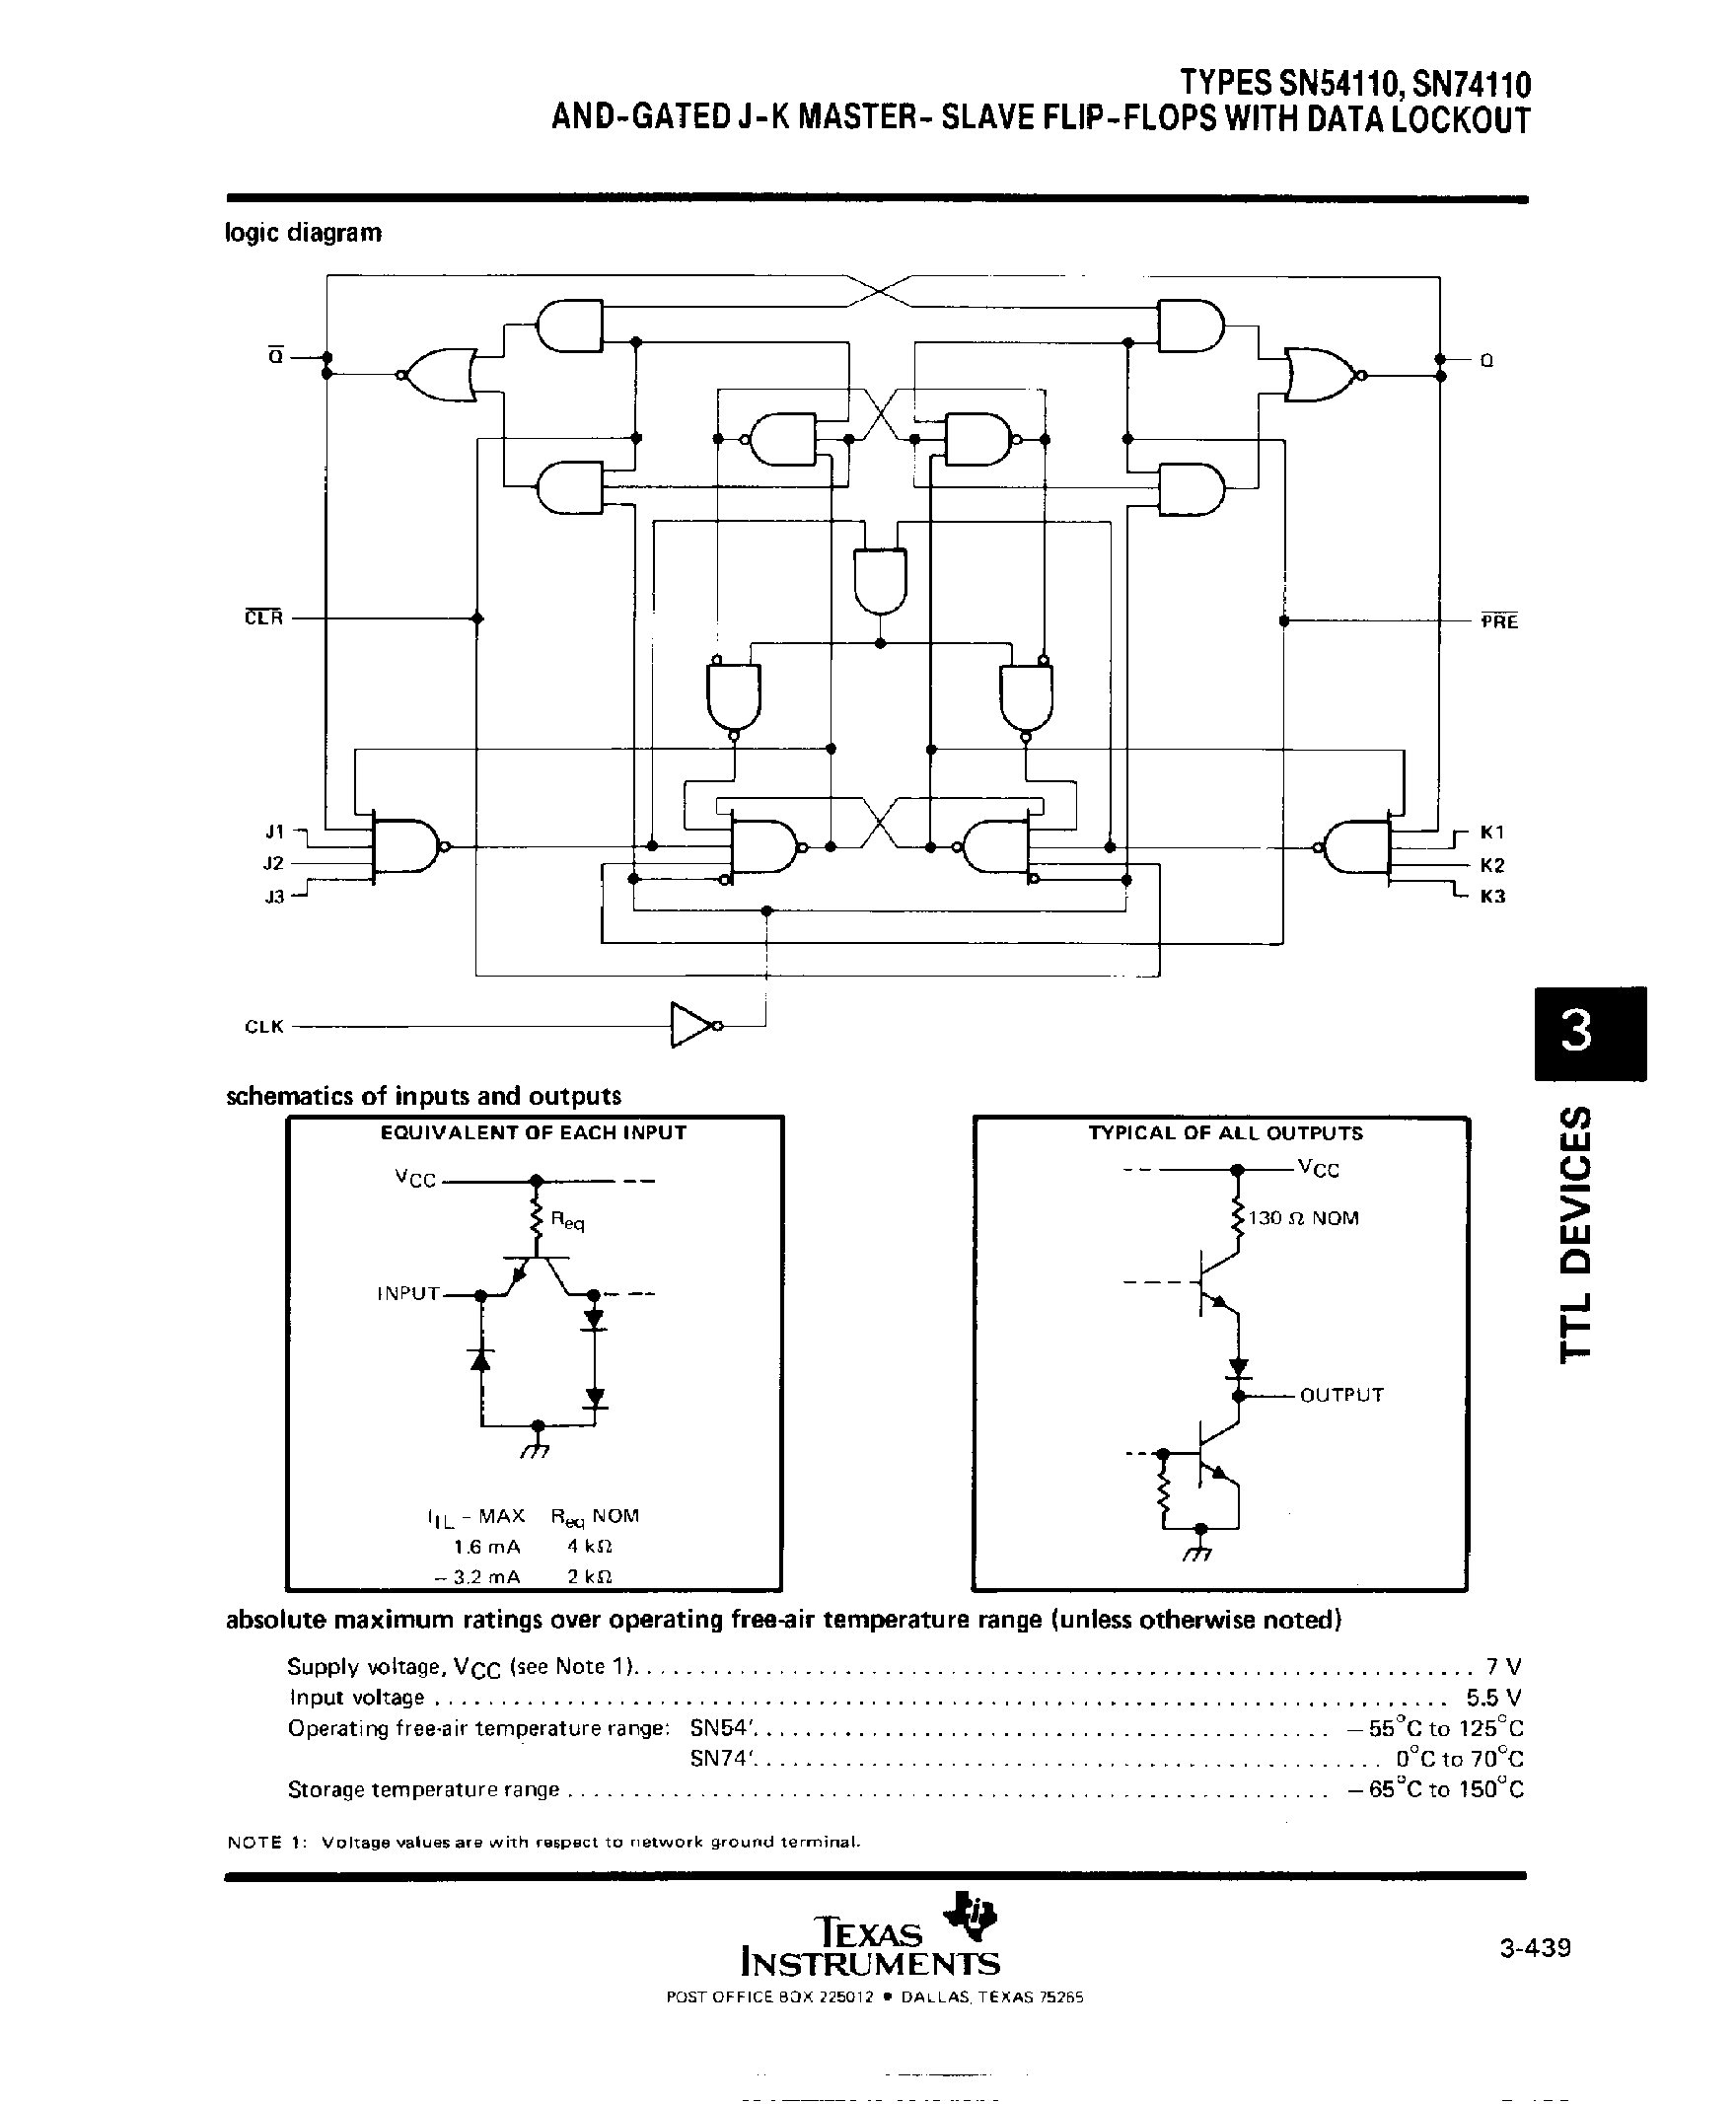 Datasheet SN74110 - AND Gated J-K Master Slave F-F with Data Lockout page 2